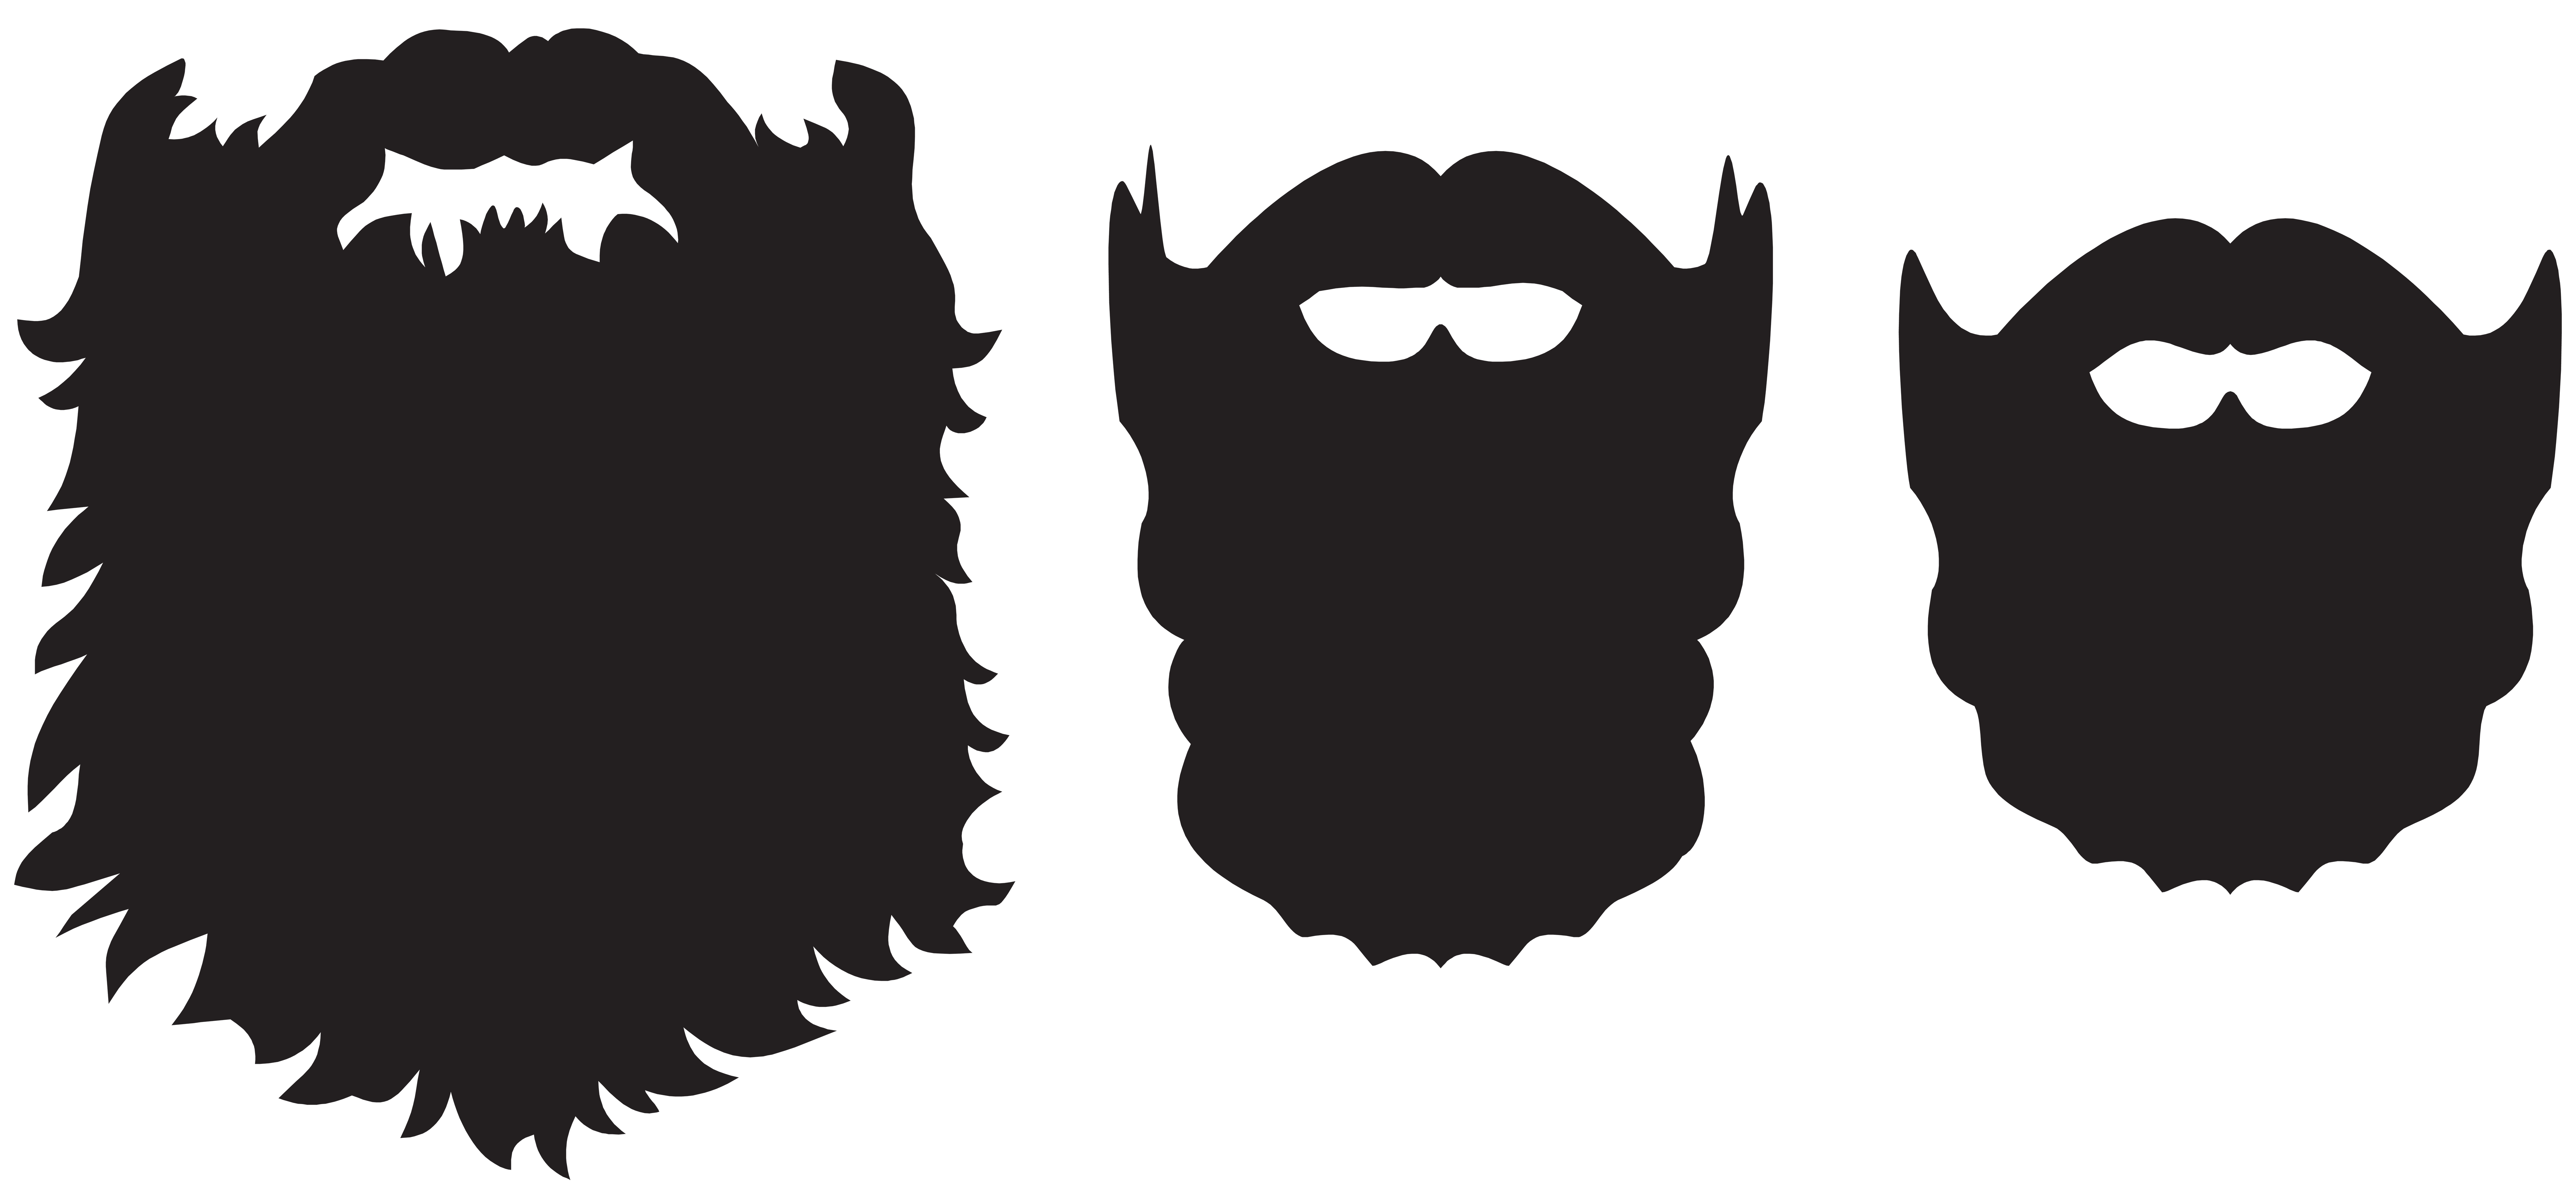 Beard PNG, Male Beard Mustaches Free Clipart Download - Free Transparent PNG  Logos